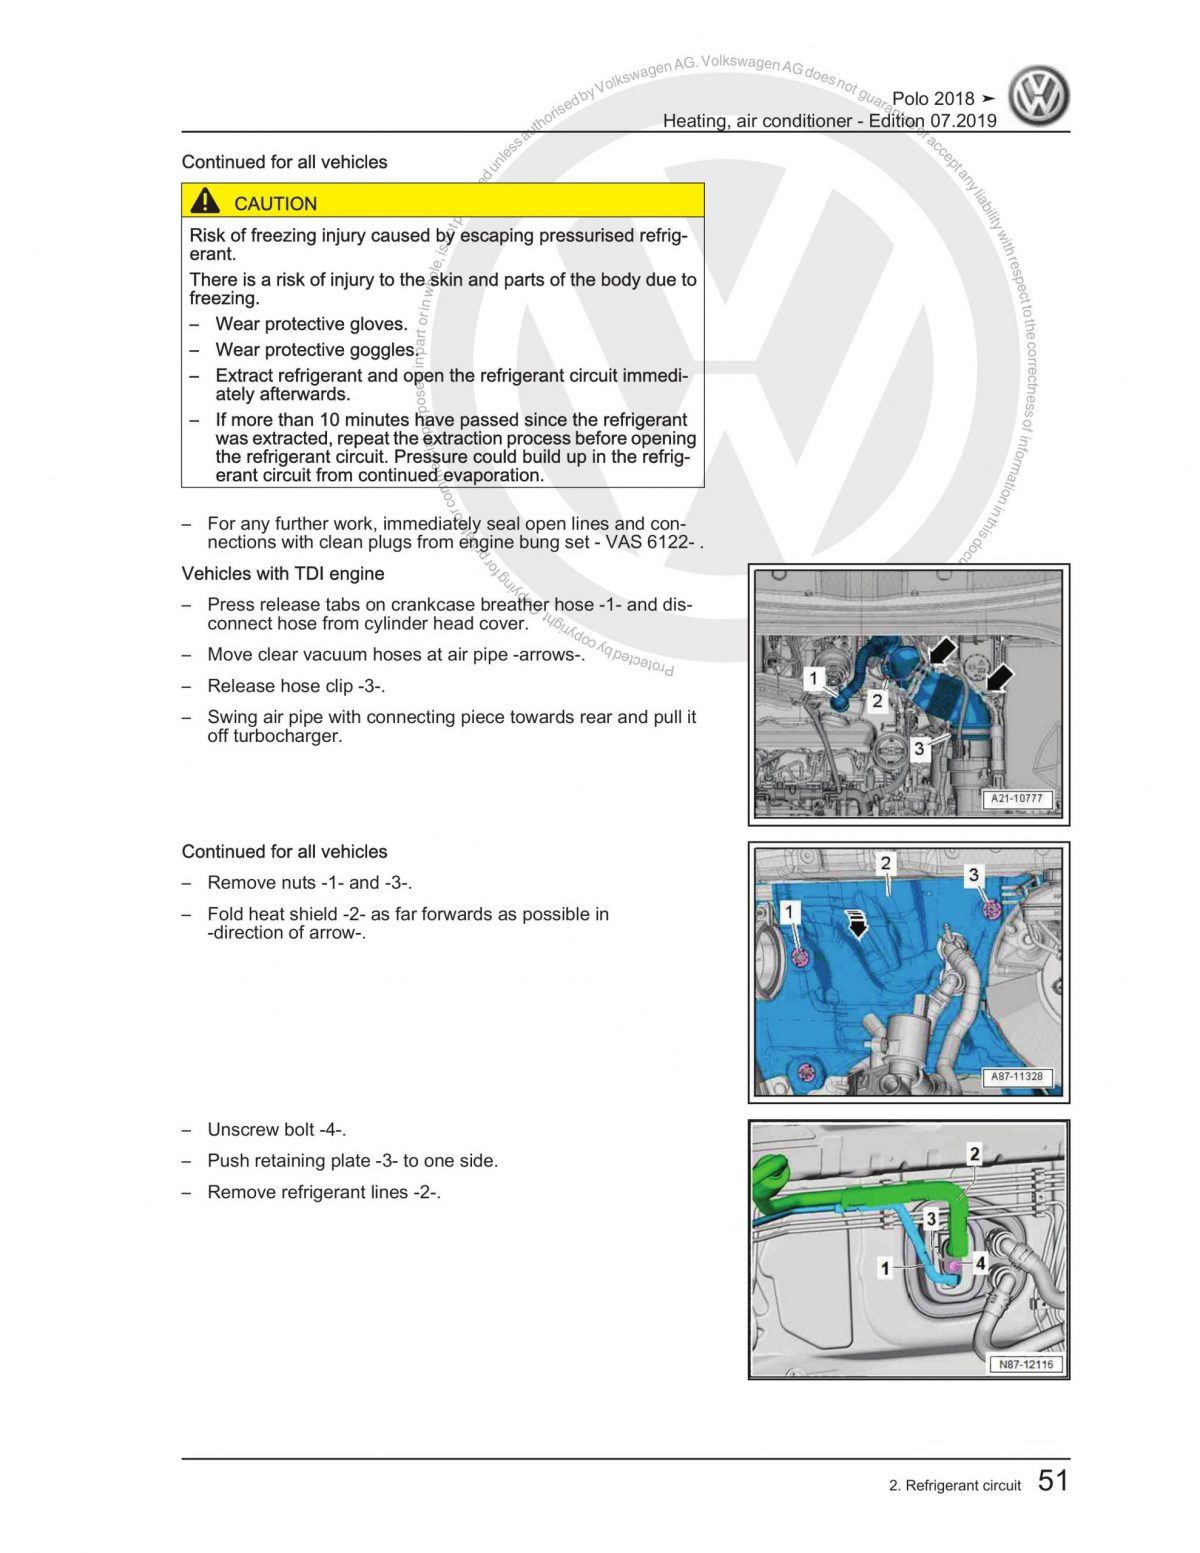 VW Polo (AW-BZ) Heating & Air Conditioner Repair Workshop Manual